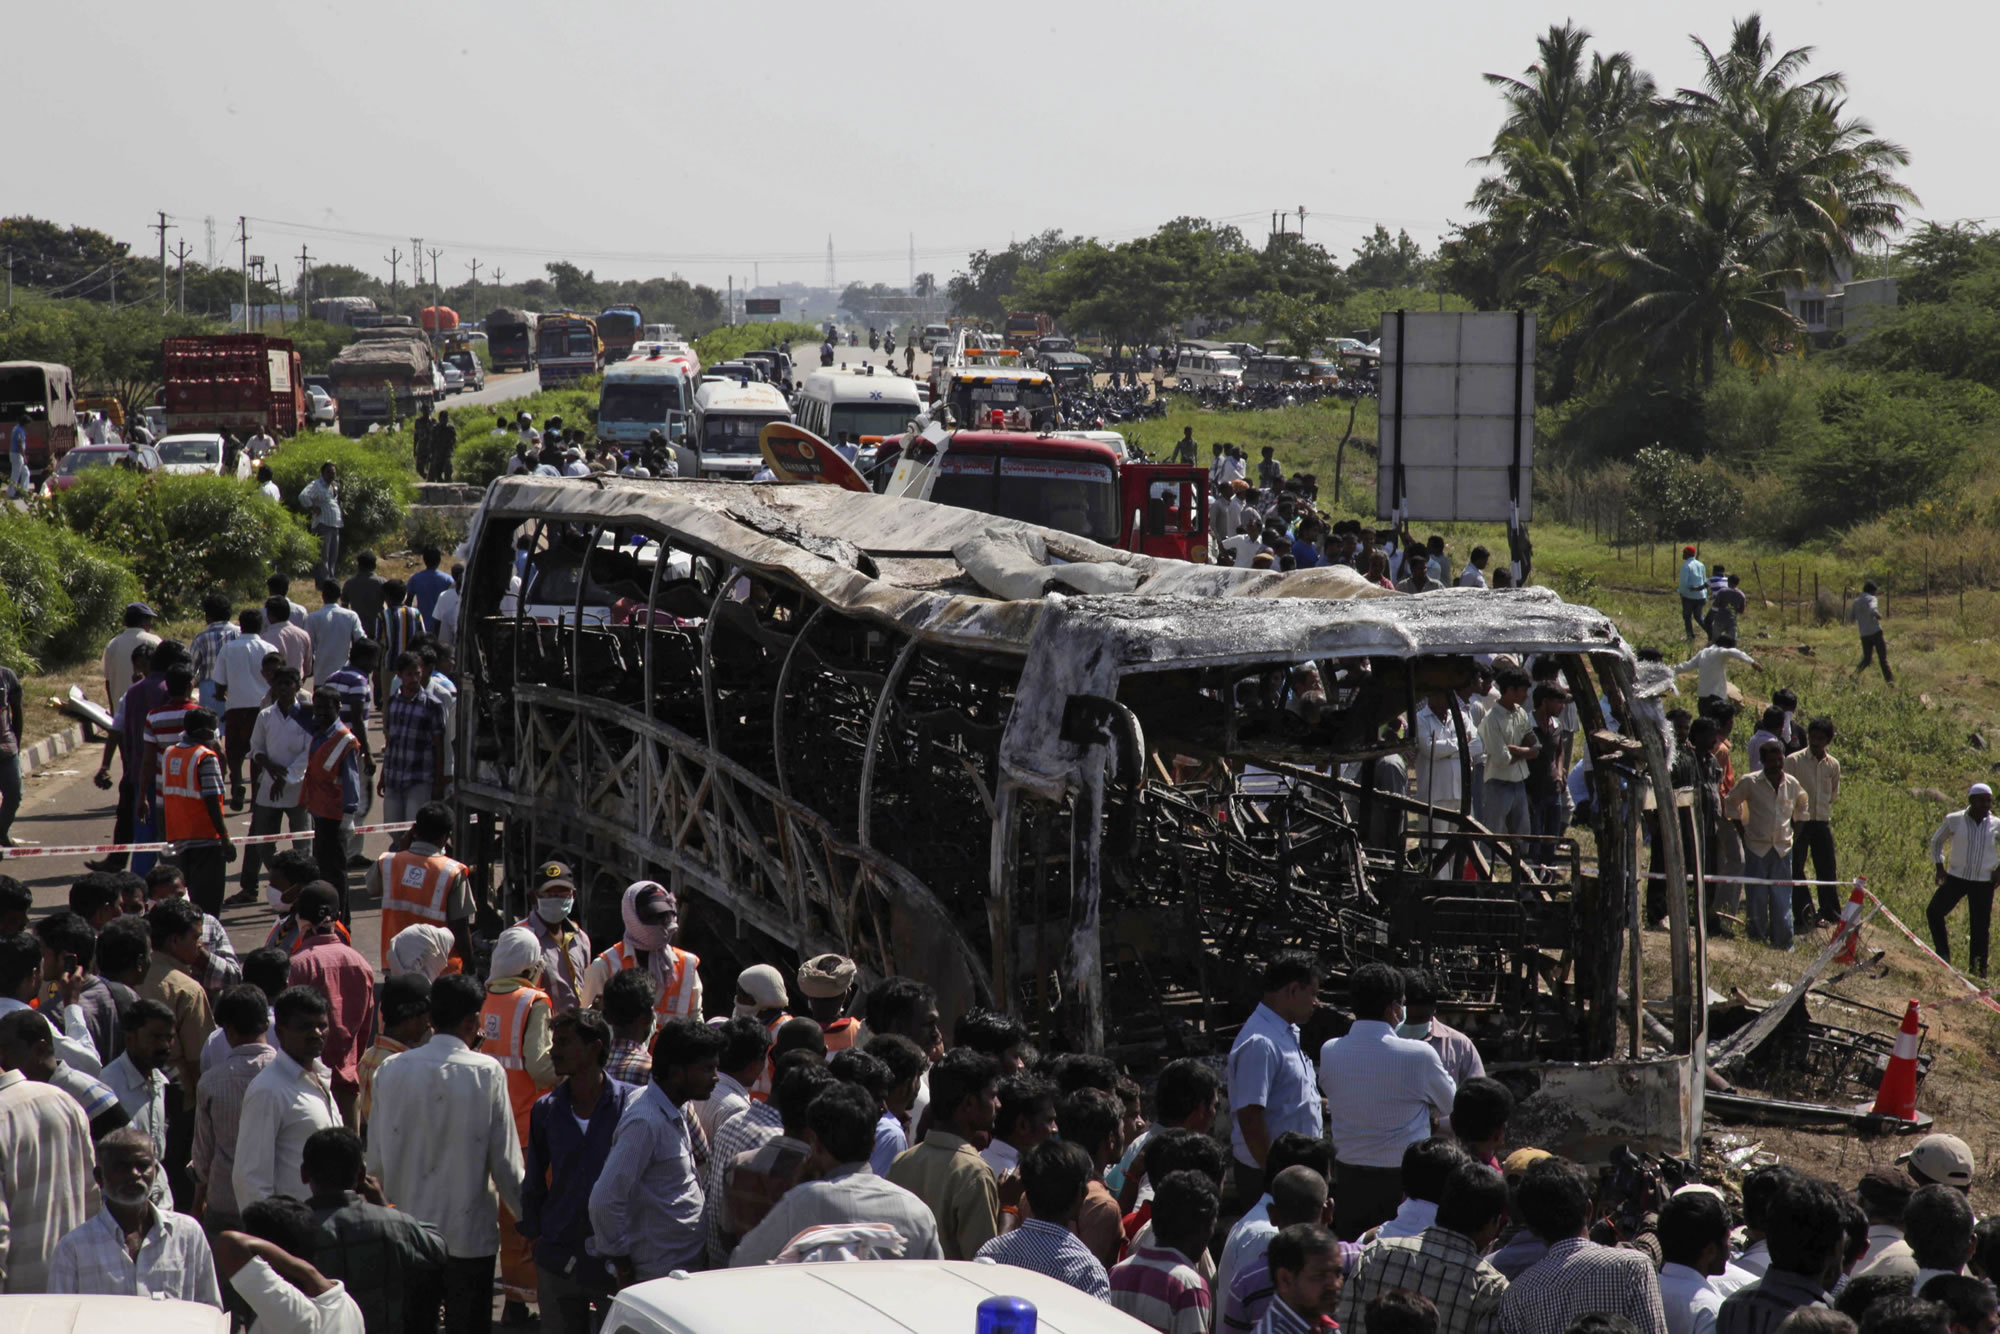 Rescuers and others gather near the wreckage of a bus that crashed into a highway barrier and erupted in flames Wednesday in southern Andhra Pradesh state, India.